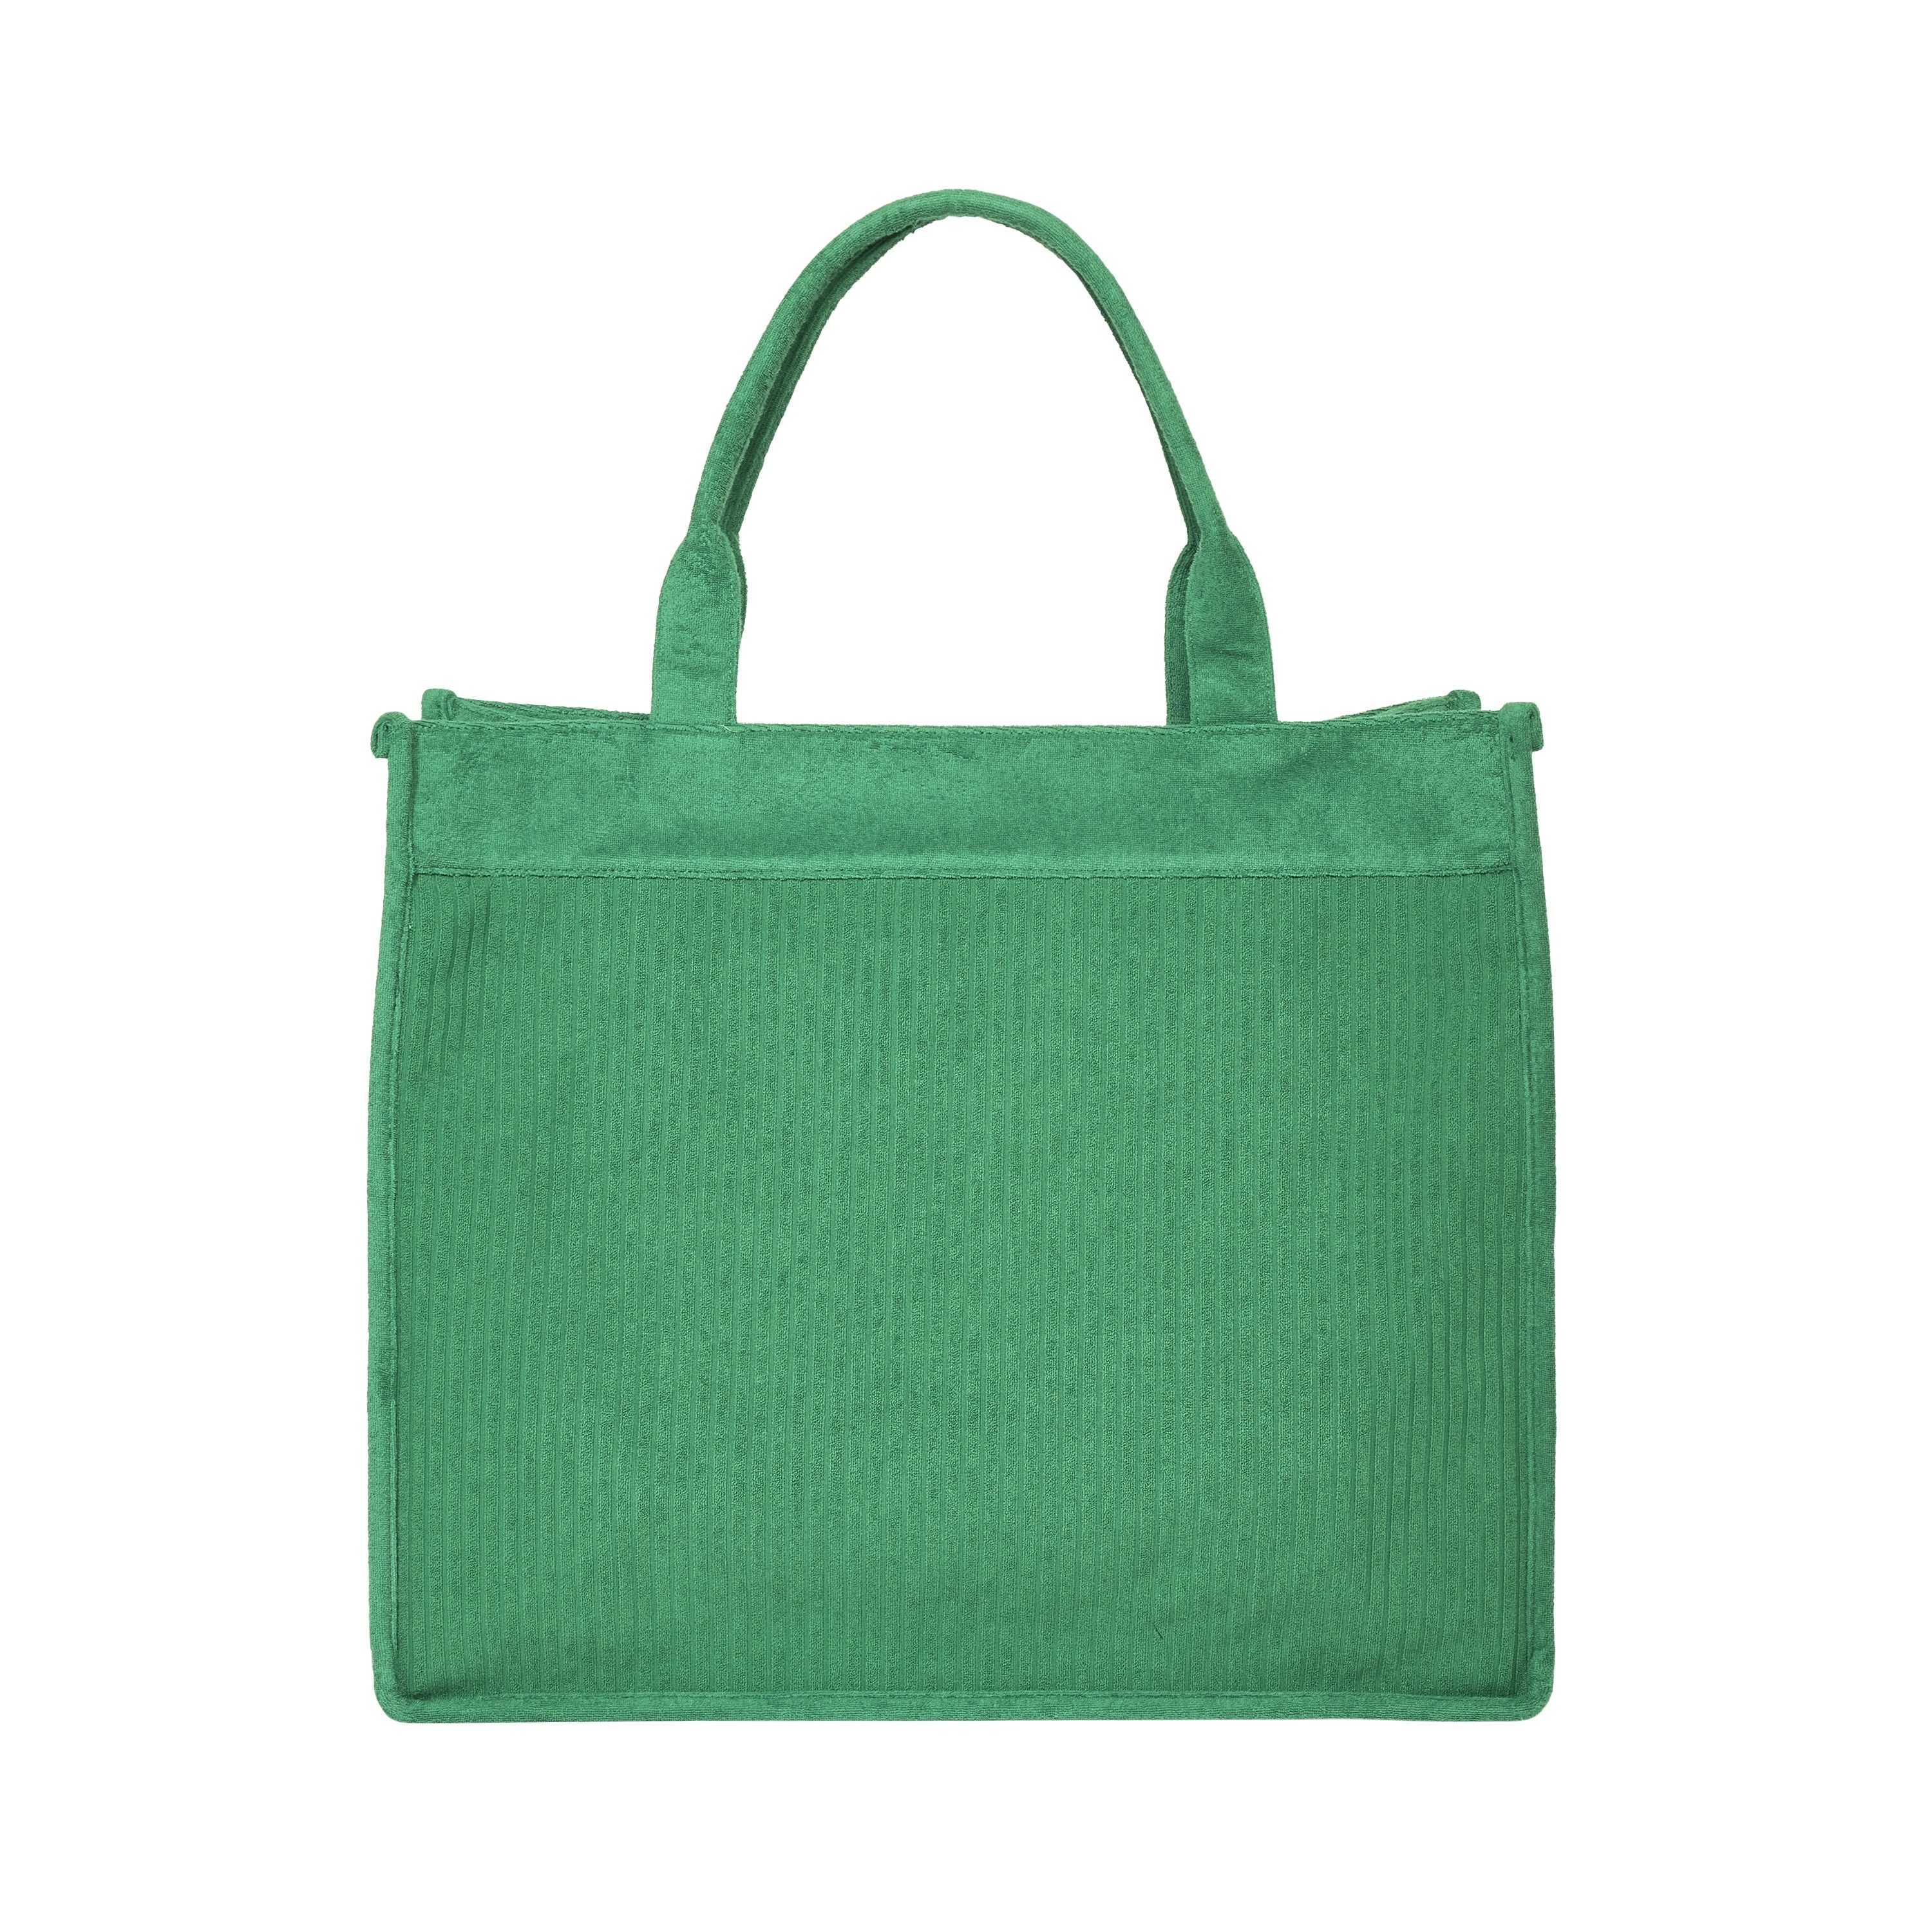 The green mesh tote